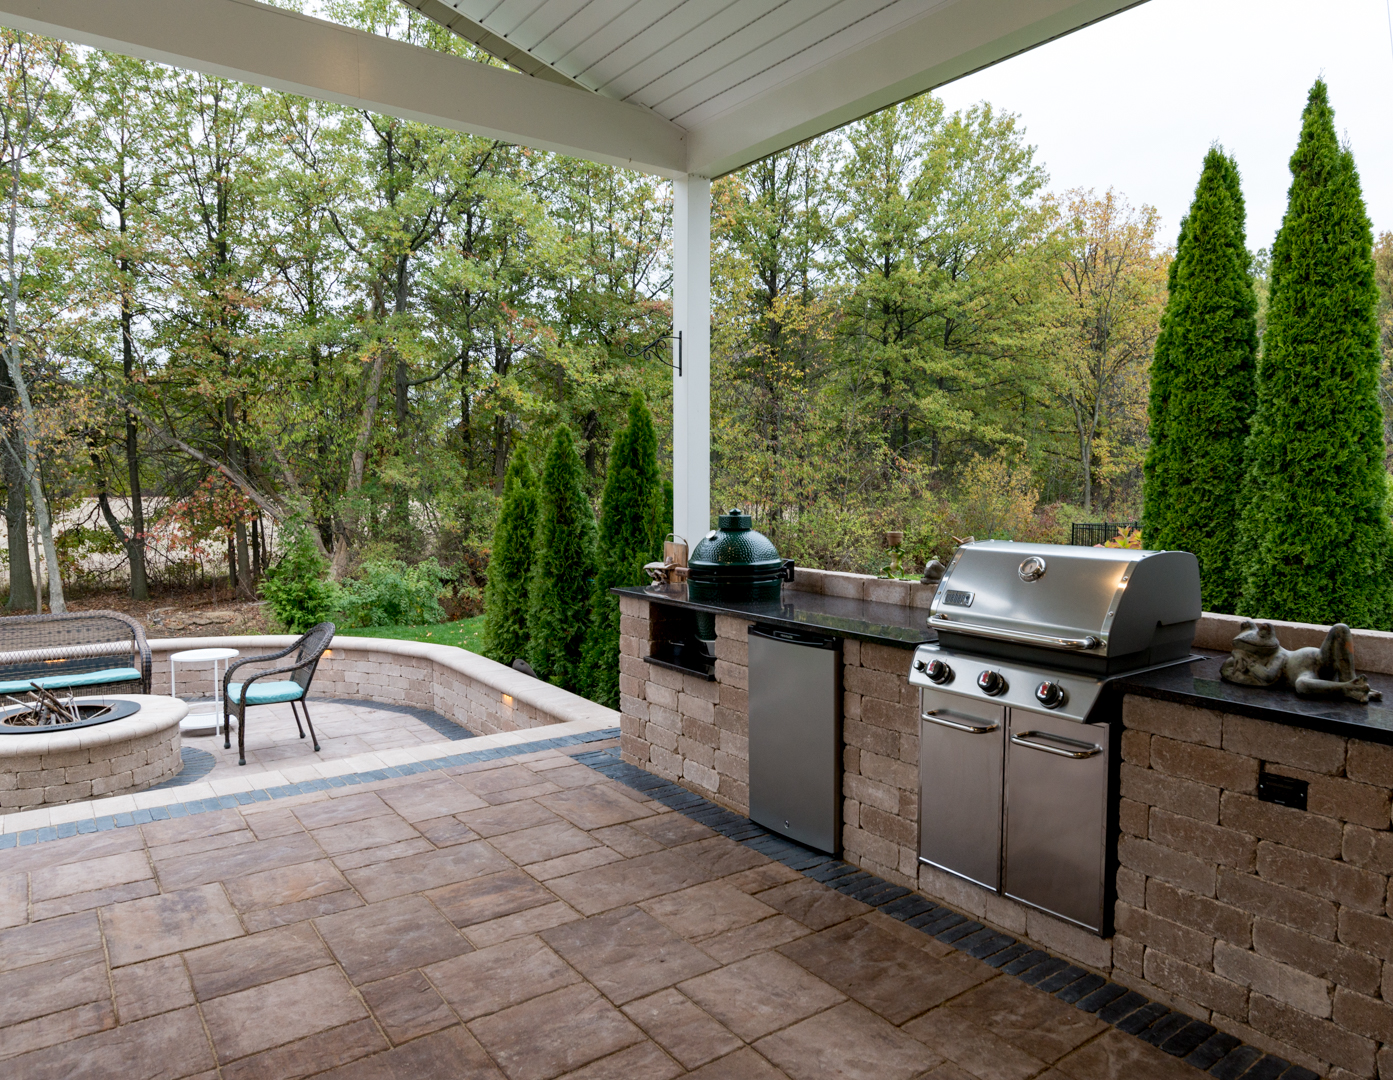 Five Reasons to Build the Outdoor Kitchen You’ve Always Wanted